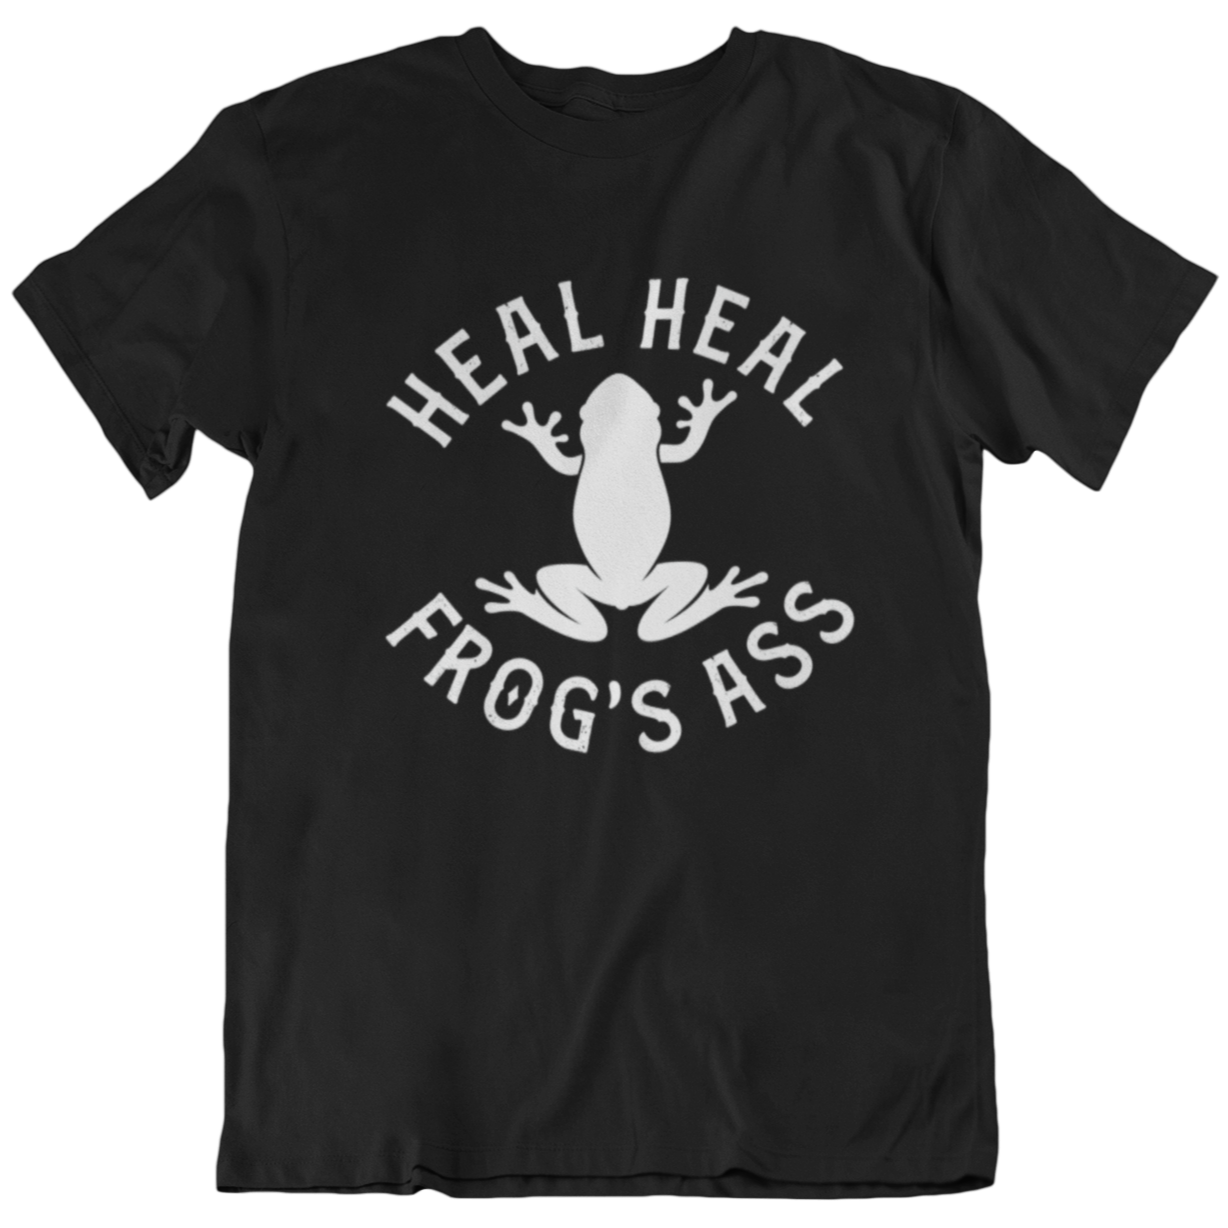 funny black t-shirt for Latino culture. the graphic depicts a frog and the words "heal heal frog's ass" in honor of sana sana colita de Rana